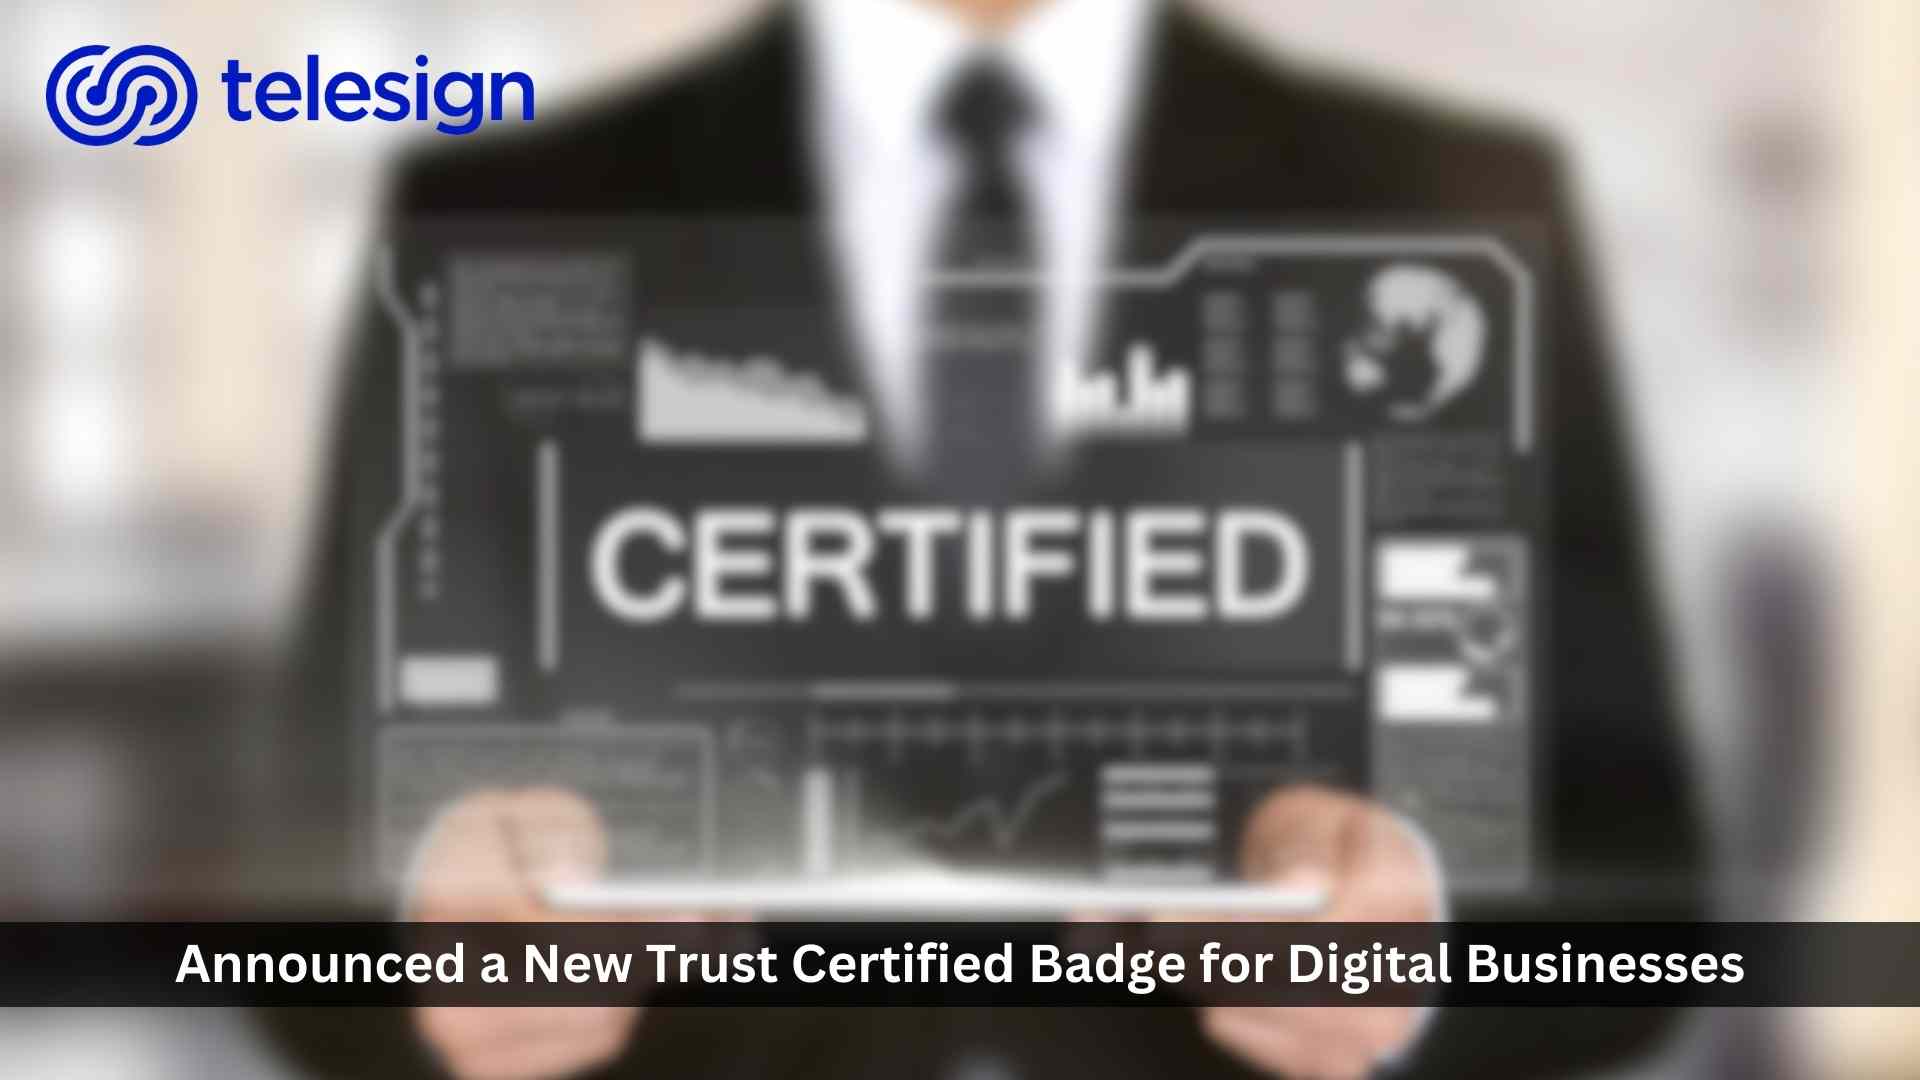 Digital Businesses Can Become ‘Trust Certified’ with New Badge from Telesign